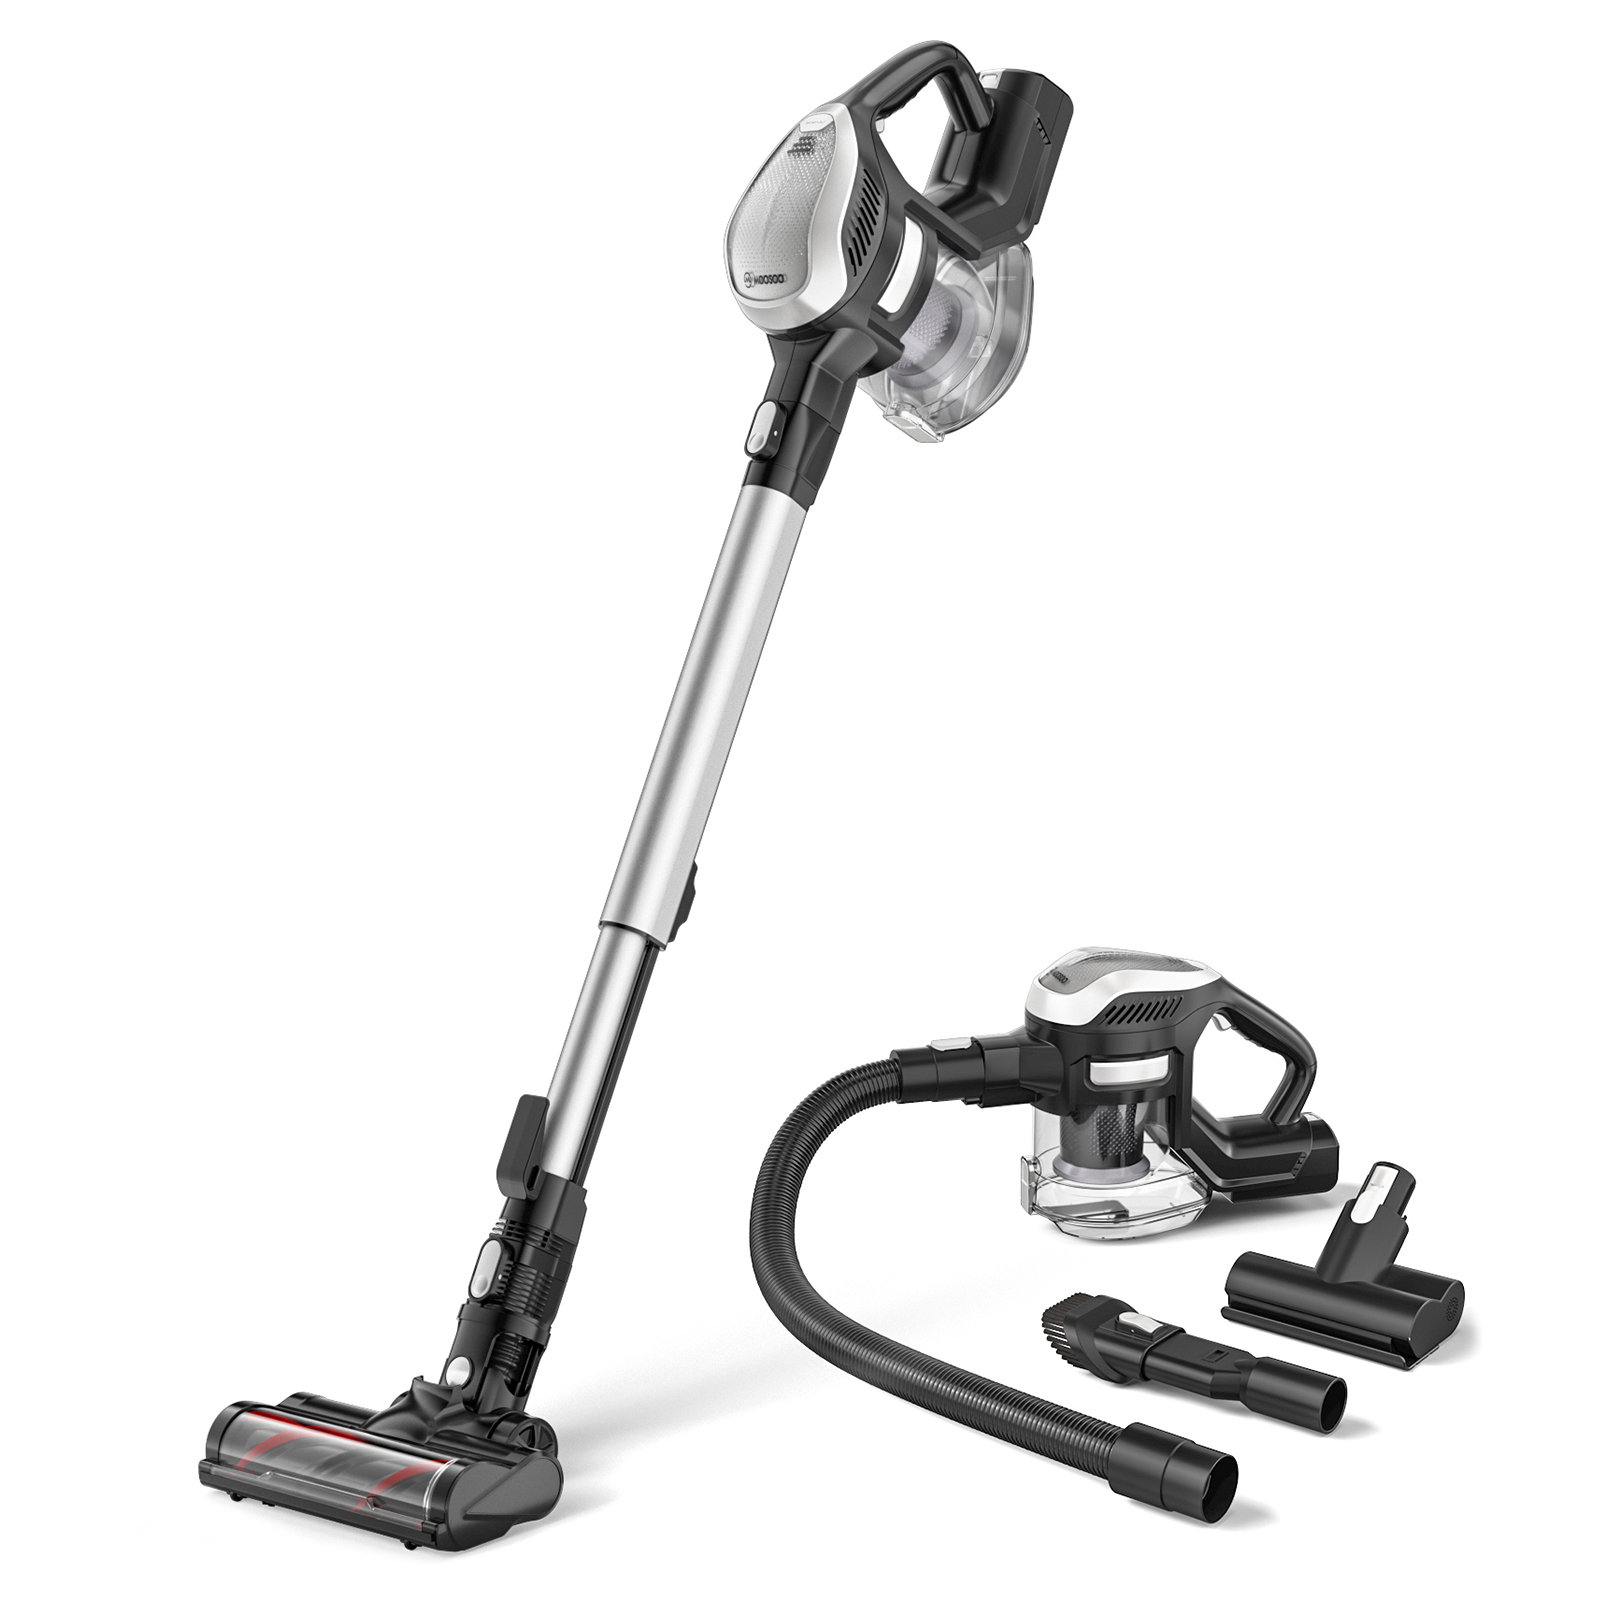 BLACK+DECKER Cordless Stick Vacuum Cleaner with Cyclonic